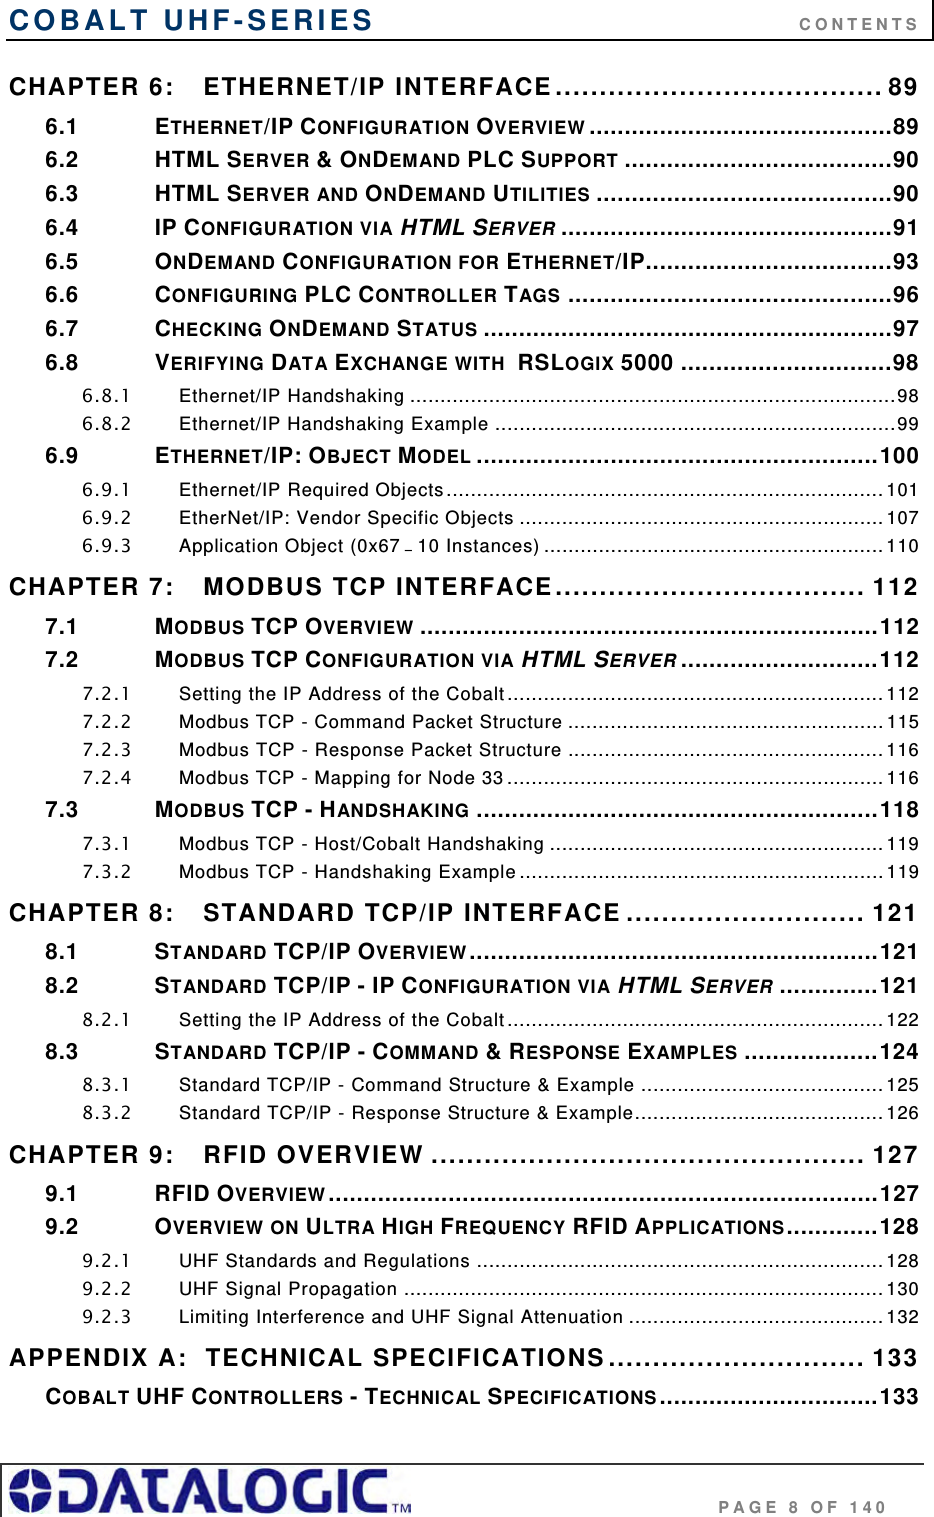 COBALT UHF-SERIES      CONTENTS                                     PAGE 8 OF 140 CHAPTER 6: ETHERNET/IP INTERFACE..................................... 89 6.1 ETHERNET/IP CONFIGURATION OVERVIEW ...........................................89 6.2 HTML SERVER &amp; ONDEMAND PLC SUPPORT ......................................90 6.3 HTML SERVER AND ONDEMAND UTILITIES ..........................................90 6.4 IP CONFIGURATION VIA HTML SERVER ...............................................91 6.5 ONDEMAND CONFIGURATION FOR ETHERNET/IP...................................93 6.6 CONFIGURING PLC CONTROLLER TAGS ..............................................96 6.7 CHECKING ONDEMAND STATUS ..........................................................97 6.8 VERIFYING DATA EXCHANGE WITH  RSLOGIX 5000 ..............................98 6.8.1 Ethernet/IP Handshaking ................................................................................98 6.8.2 Ethernet/IP Handshaking Example ..................................................................99 6.9 ETHERNET/IP: OBJECT MODEL .........................................................100 6.9.1 Ethernet/IP Required Objects........................................................................ 101 6.9.2 EtherNet/IP: Vendor Specific Objects ............................................................107 6.9.3 Application Object (0x67 – 10 Instances) ........................................................110 CHAPTER 7: MODBUS TCP INTERFACE................................... 112 7.1 MODBUS TCP OVERVIEW .................................................................112 7.2 MODBUS TCP CONFIGURATION VIA HTML SERVER ............................112 7.2.1 Setting the IP Address of the Cobalt.............................................................. 112 7.2.2 Modbus TCP - Command Packet Structure ....................................................115 7.2.3 Modbus TCP - Response Packet Structure .................................................... 116 7.2.4 Modbus TCP - Mapping for Node 33 ..............................................................116 7.3 MODBUS TCP - HANDSHAKING .........................................................118 7.3.1 Modbus TCP - Host/Cobalt Handshaking .......................................................119 7.3.2 Modbus TCP - Handshaking Example ............................................................119 CHAPTER 8: STANDARD TCP/IP INTERFACE ........................... 121 8.1 STANDARD TCP/IP OVERVIEW..........................................................121 8.2 STANDARD TCP/IP - IP CONFIGURATION VIA HTML SERVER ..............121 8.2.1 Setting the IP Address of the Cobalt.............................................................. 122 8.3 STANDARD TCP/IP - COMMAND &amp; RESPONSE EXAMPLES ...................124 8.3.1 Standard TCP/IP - Command Structure &amp; Example ........................................ 125 8.3.2 Standard TCP/IP - Response Structure &amp; Example......................................... 126 CHAPTER 9: RFID OVERVIEW ................................................. 127 9.1 RFID OVERVIEW..............................................................................127 9.2 OVERVIEW ON ULTRA HIGH FREQUENCY RFID APPLICATIONS.............128 9.2.1 UHF Standards and Regulations ................................................................... 128 9.2.2 UHF Signal Propagation ............................................................................... 130 9.2.3 Limiting Interference and UHF Signal Attenuation .......................................... 132 APPENDIX A:  TECHNICAL SPECIFICATIONS............................. 133 COBALT UHF CONTROLLERS - TECHNICAL SPECIFICATIONS...............................133 